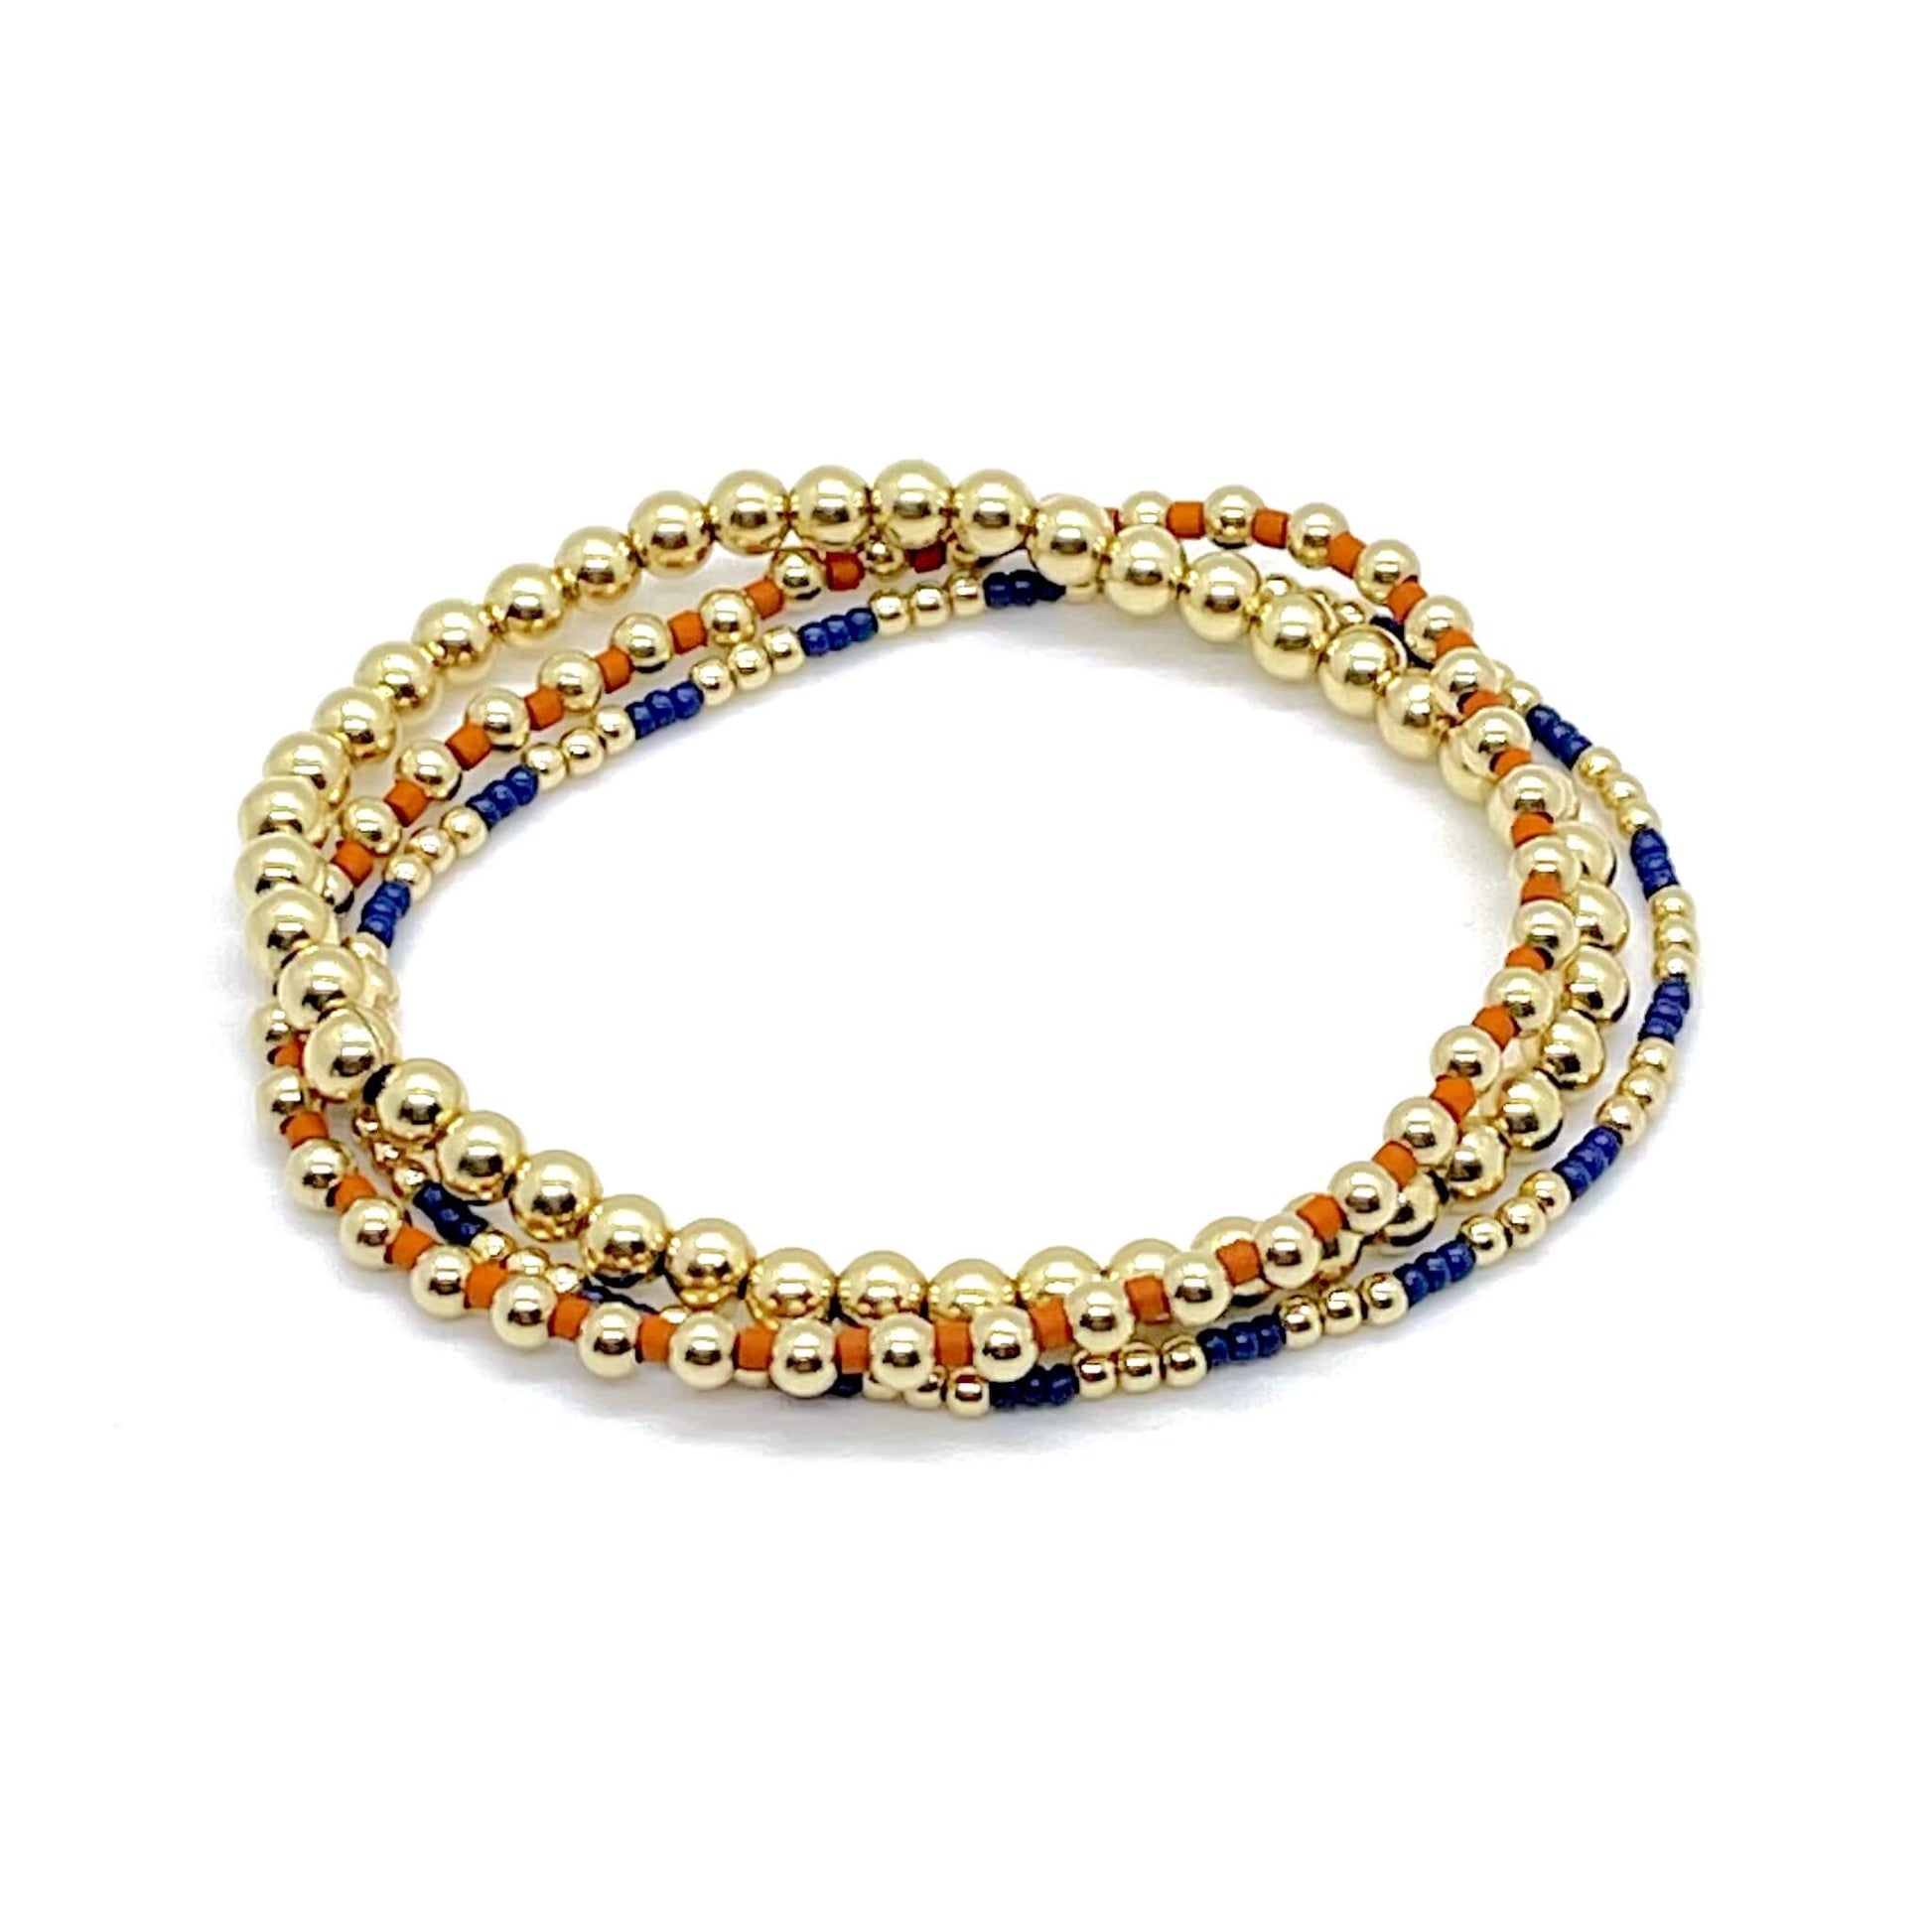 Set of 3 delicate beaded stretch bracelets with tiny navy and burnt orange glass seed beads and 14k gold-fill beads.